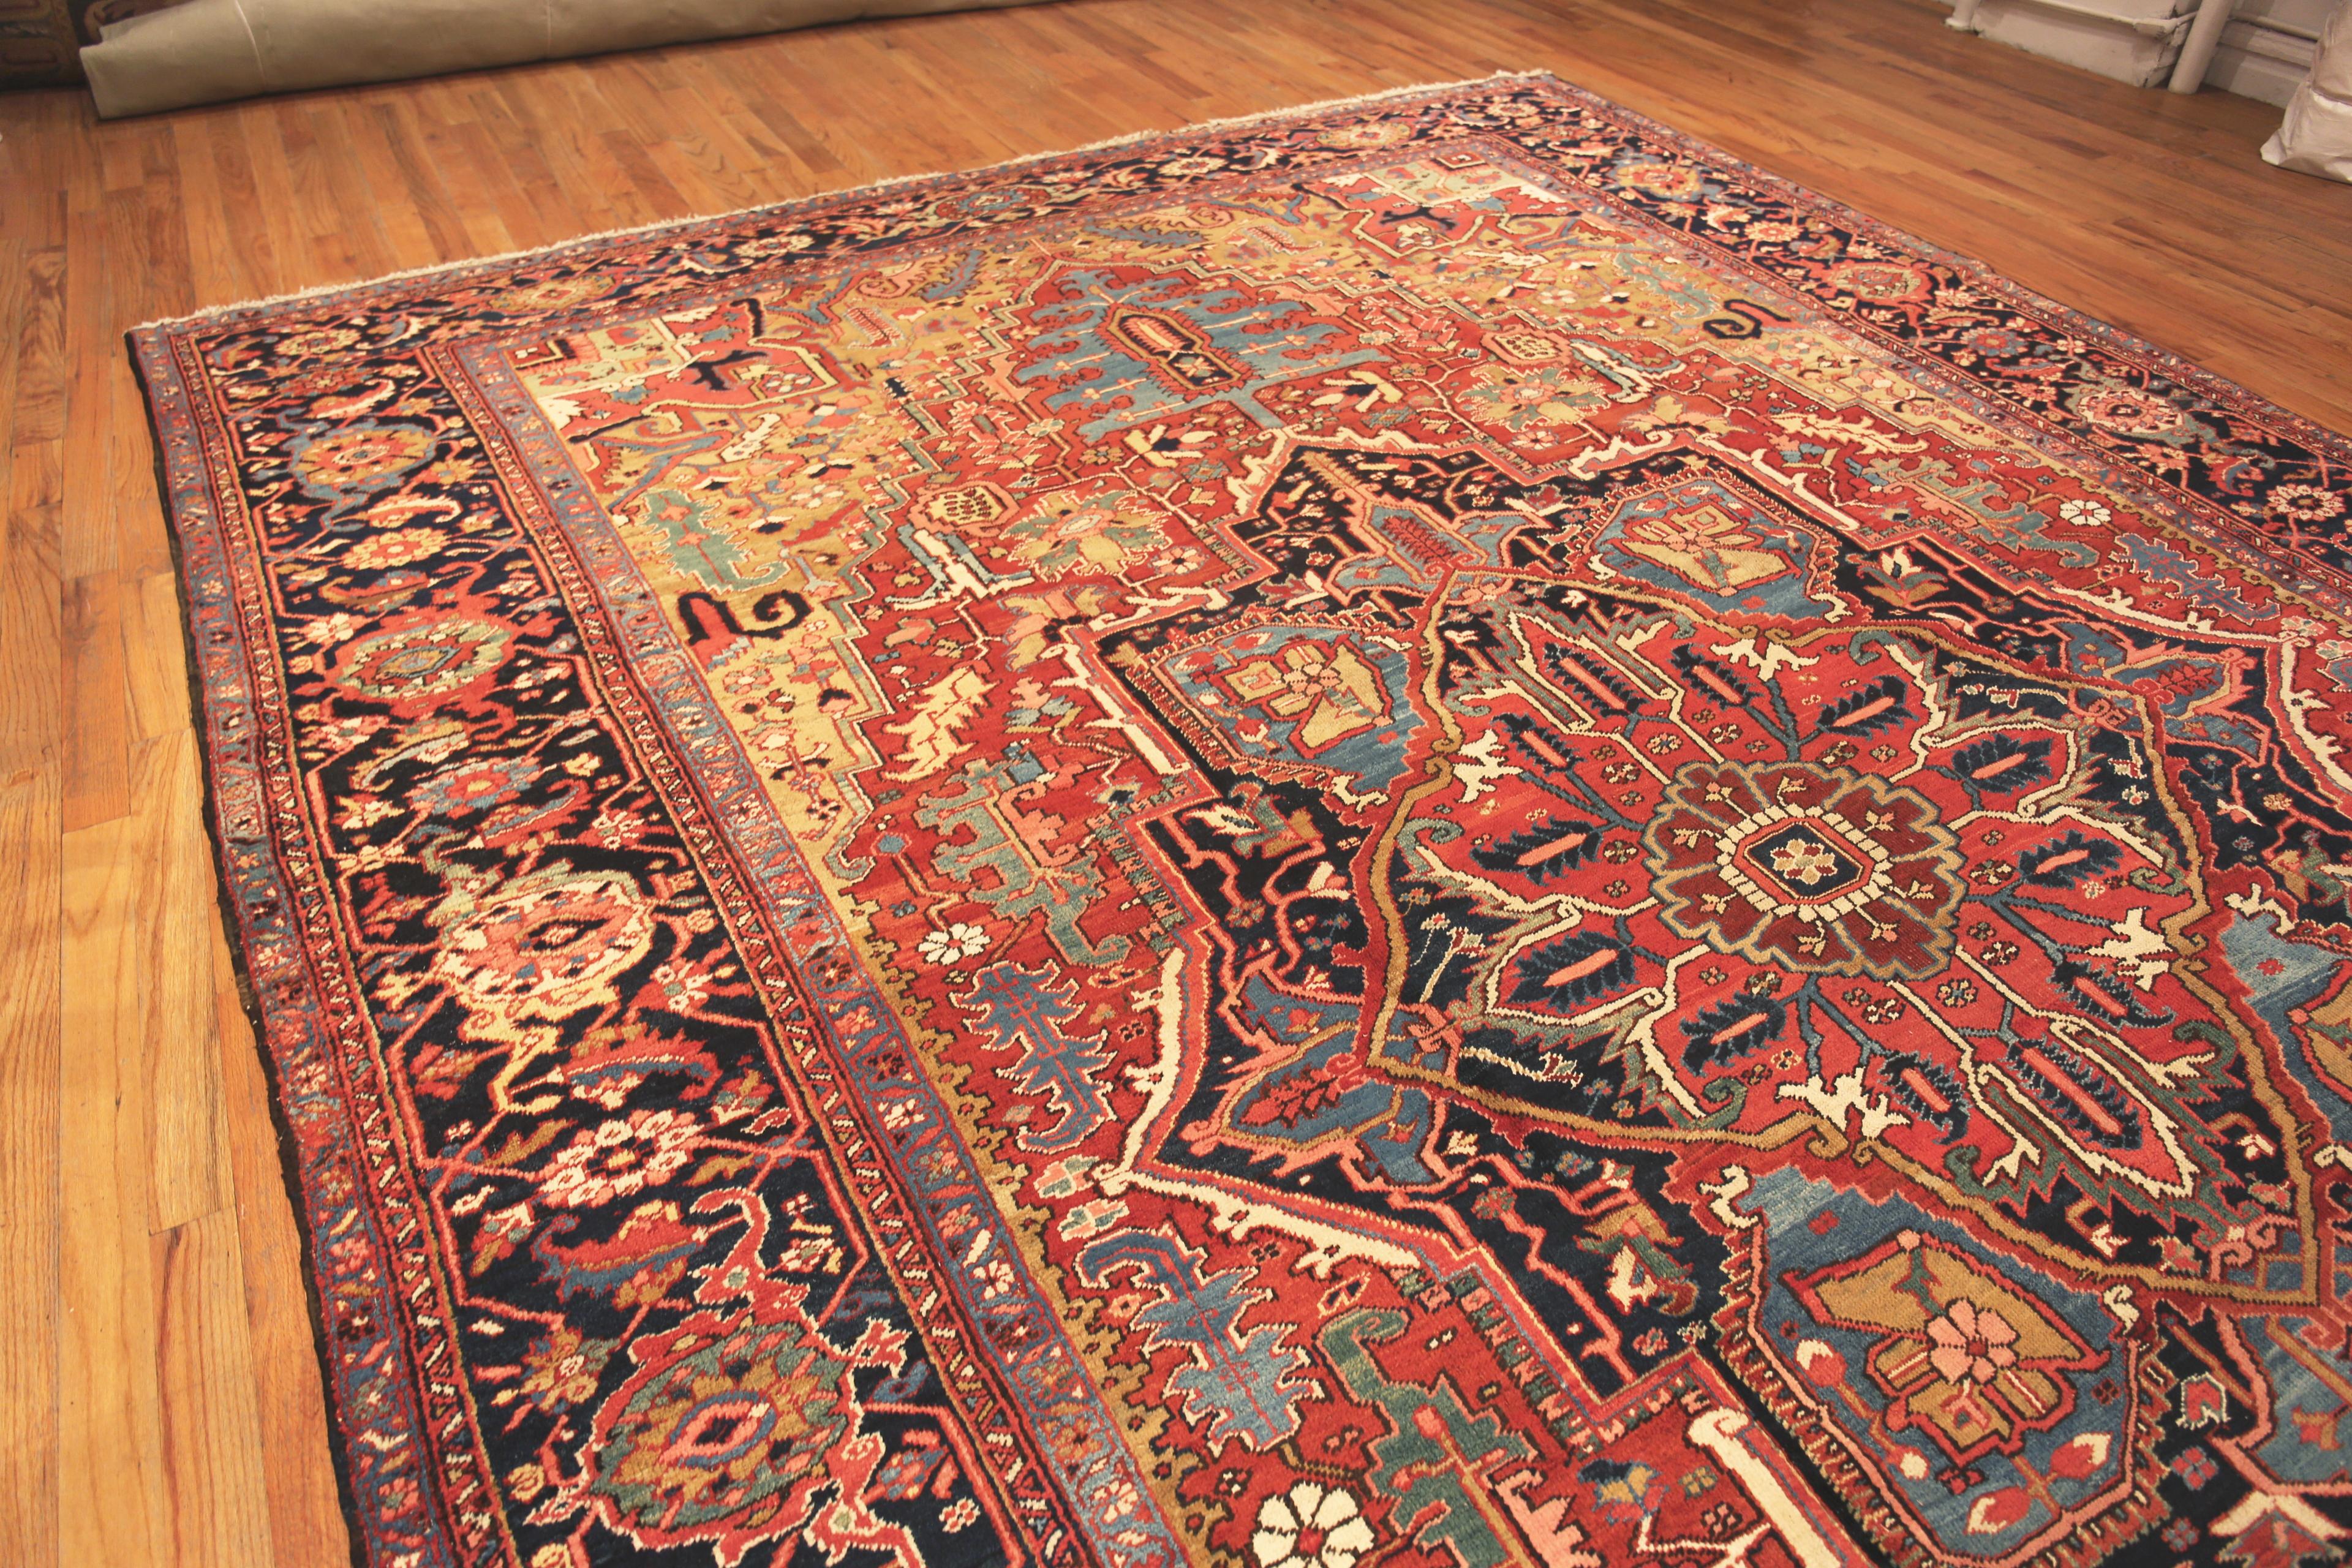 Beautiful Large Antique Persian Heriz Area Rug, Country of Origin / rug type: Persian Rugs, Circa date: 1900. Size: 11 ft 9 in x 18 ft 6 in (3.58 m x 5.64 m)
 